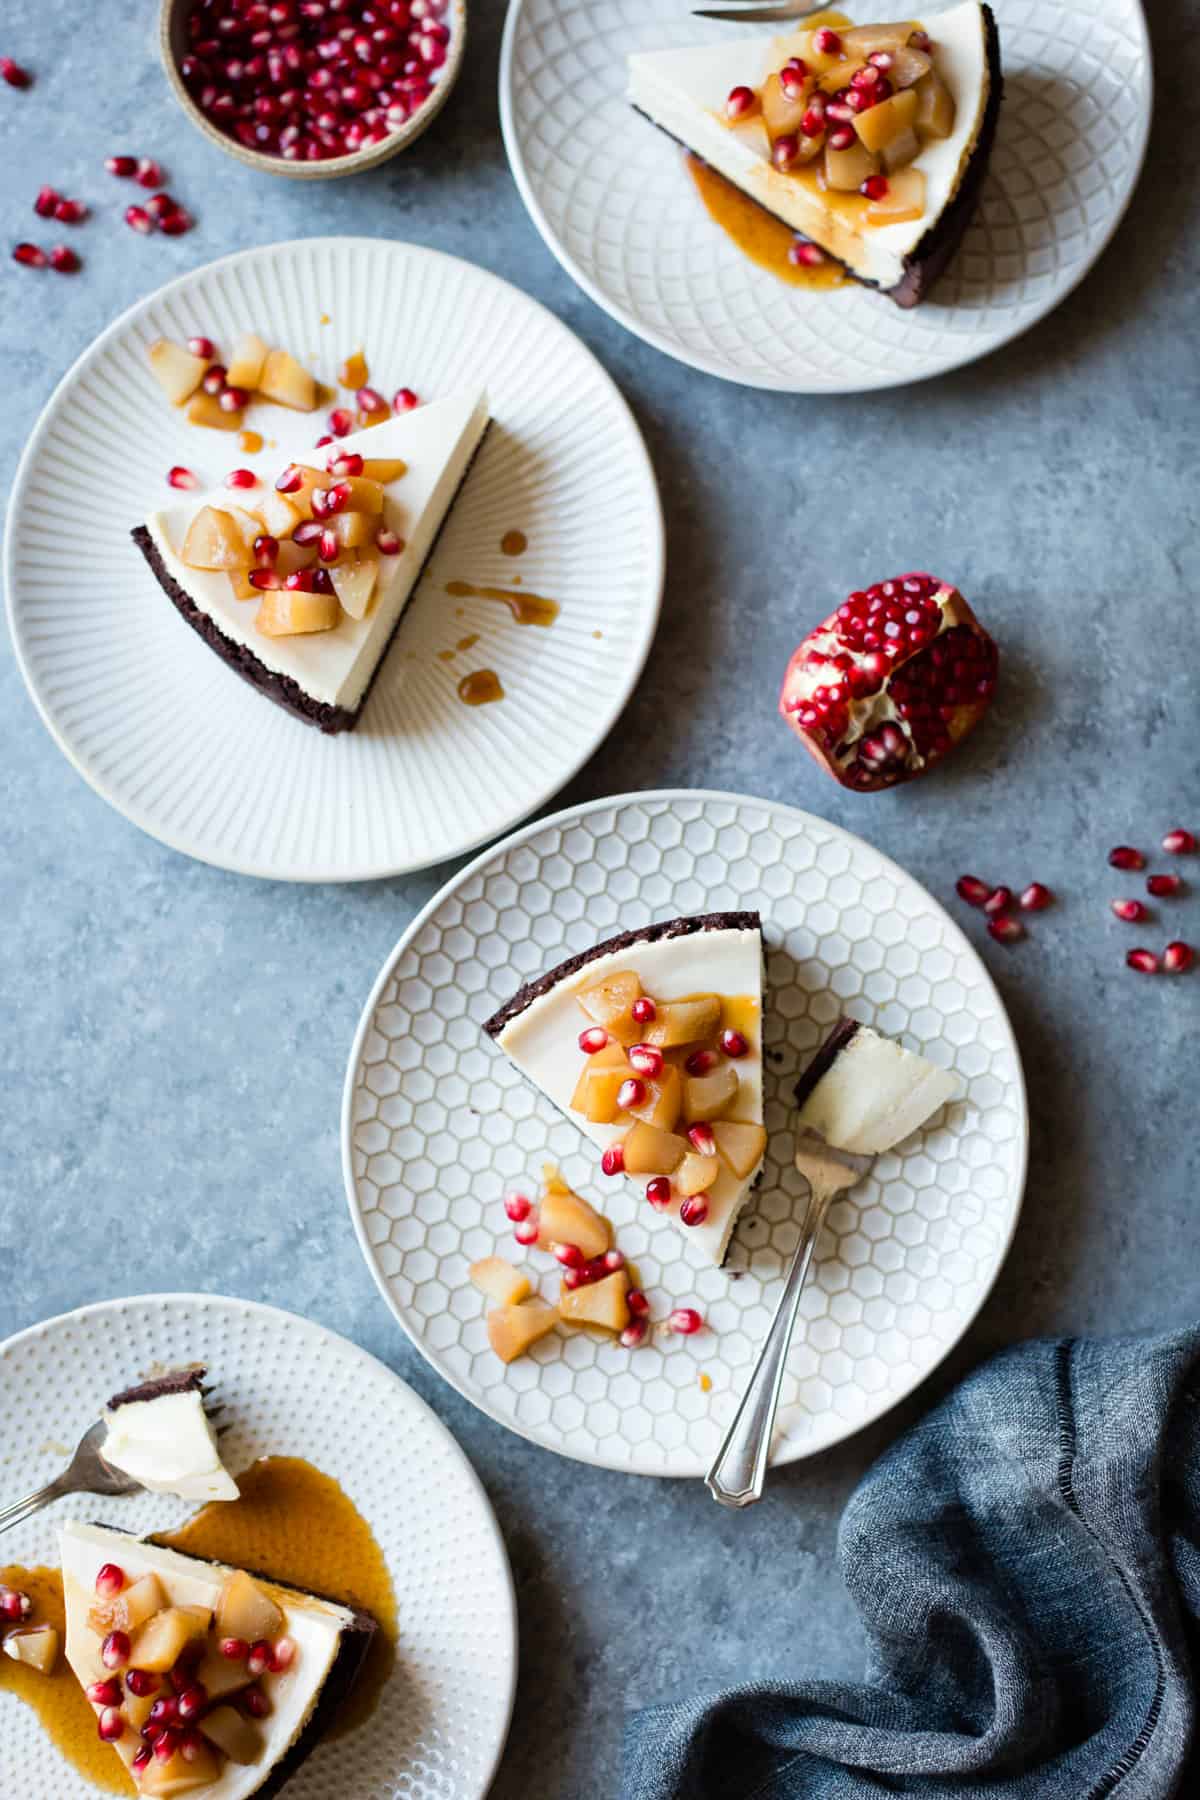 slices of Chocolate Crusted Chèvre Cheesecake with Earl Grey Poached Pears & Pomegranate {gluten-free}